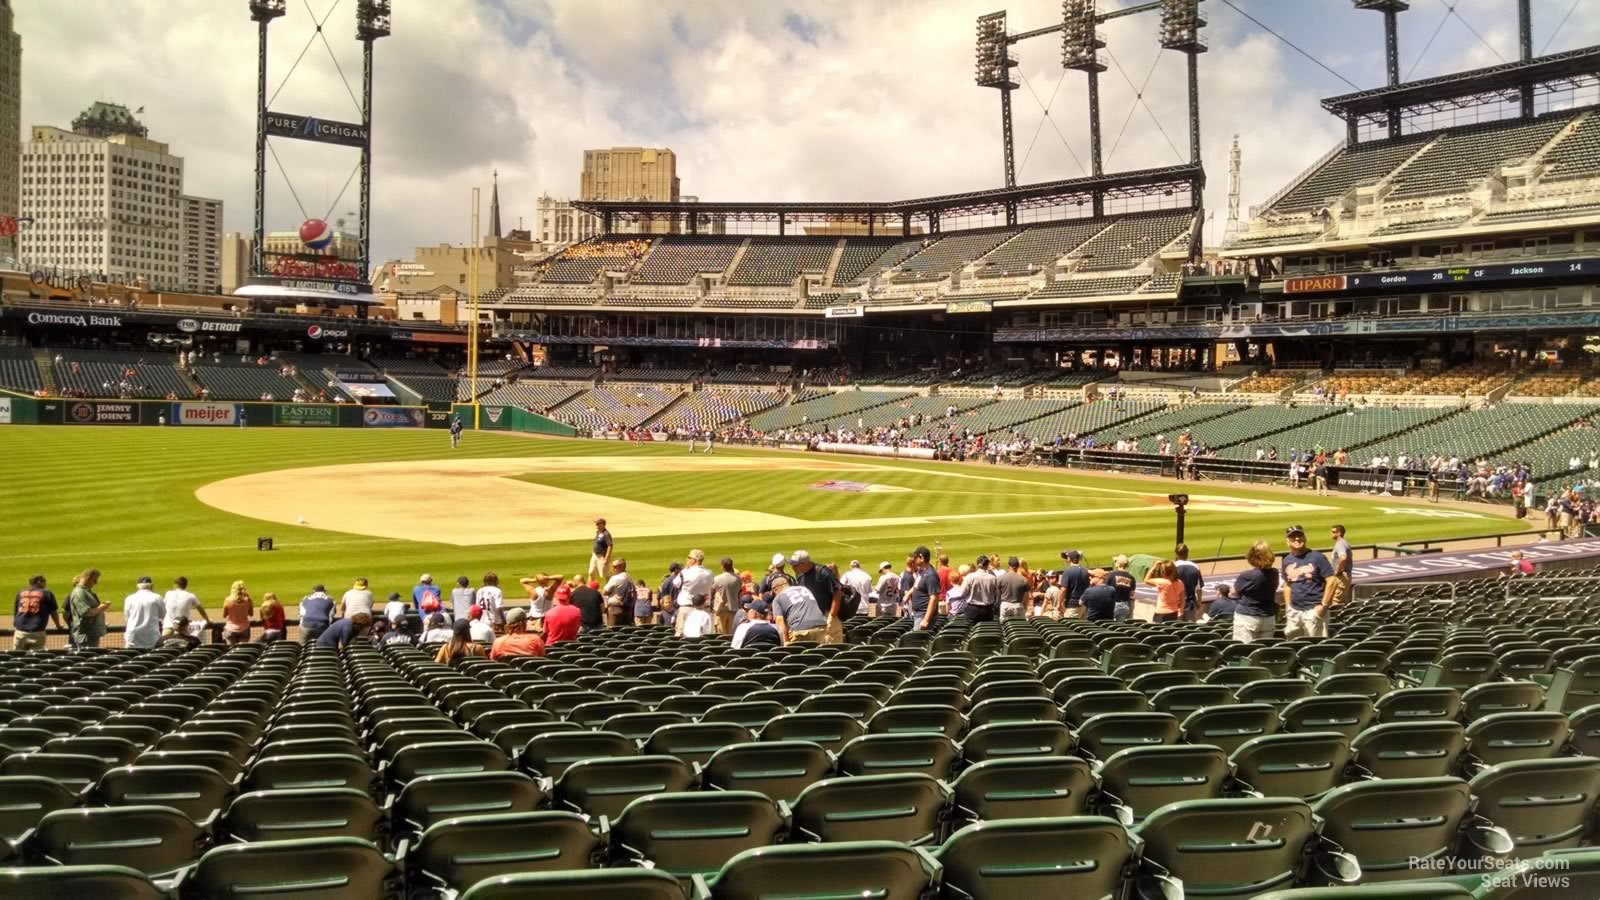 Tigers Seating Chart View